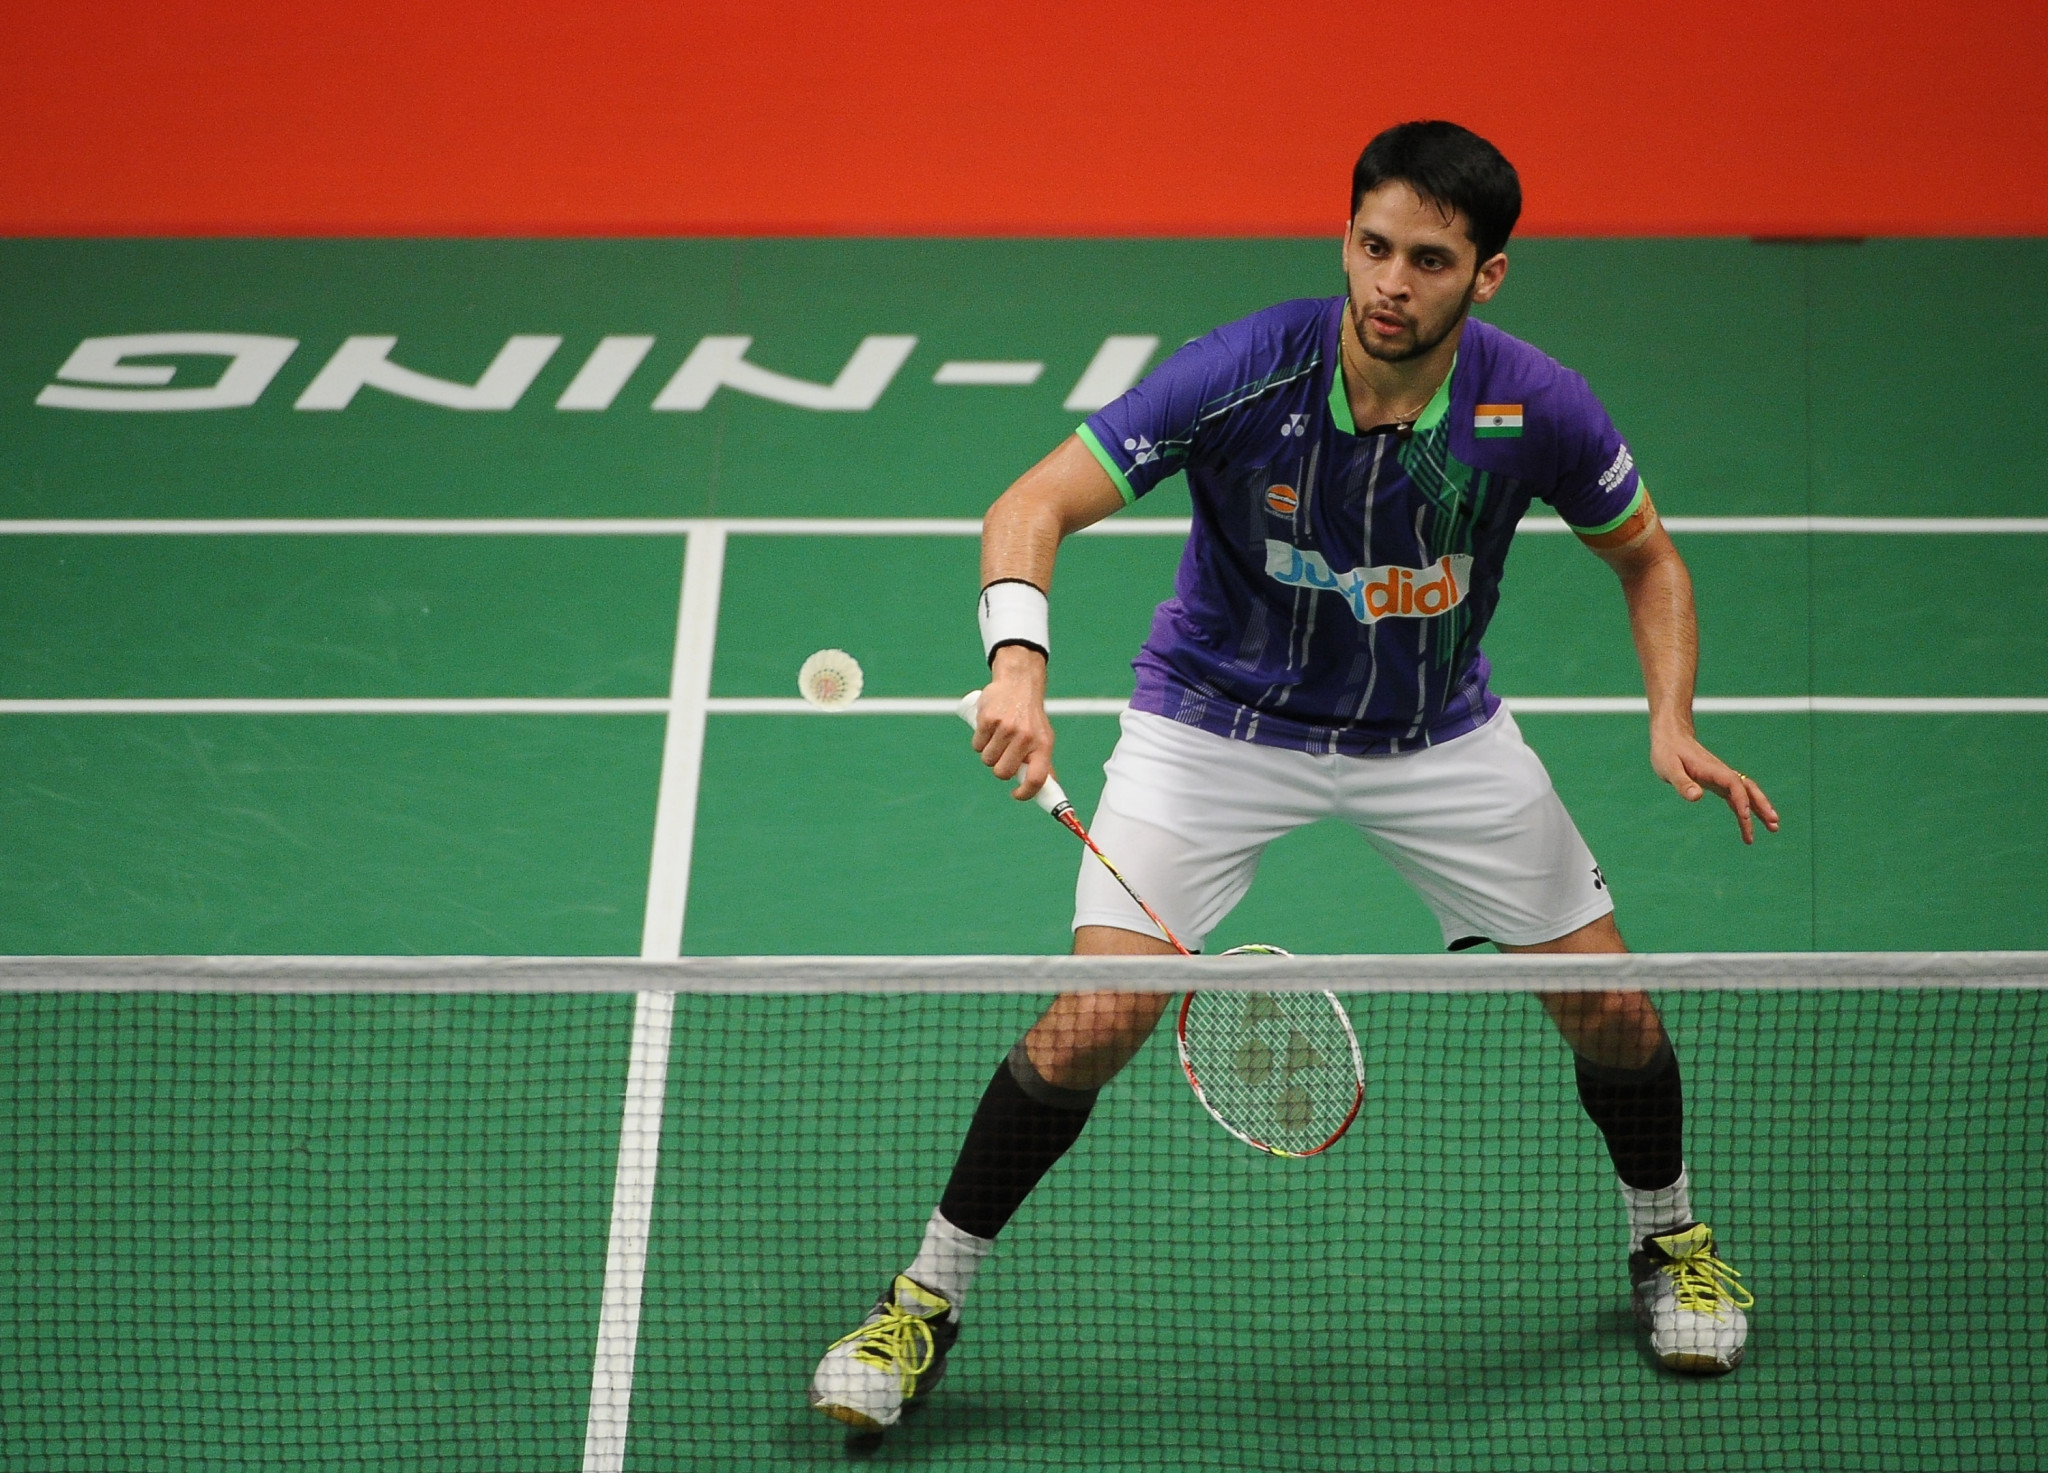 Glasgow 2014 Commonwealth Games champion Parupalli Kashyap criticised the new BWF calendar for 2020 ©Getty Images